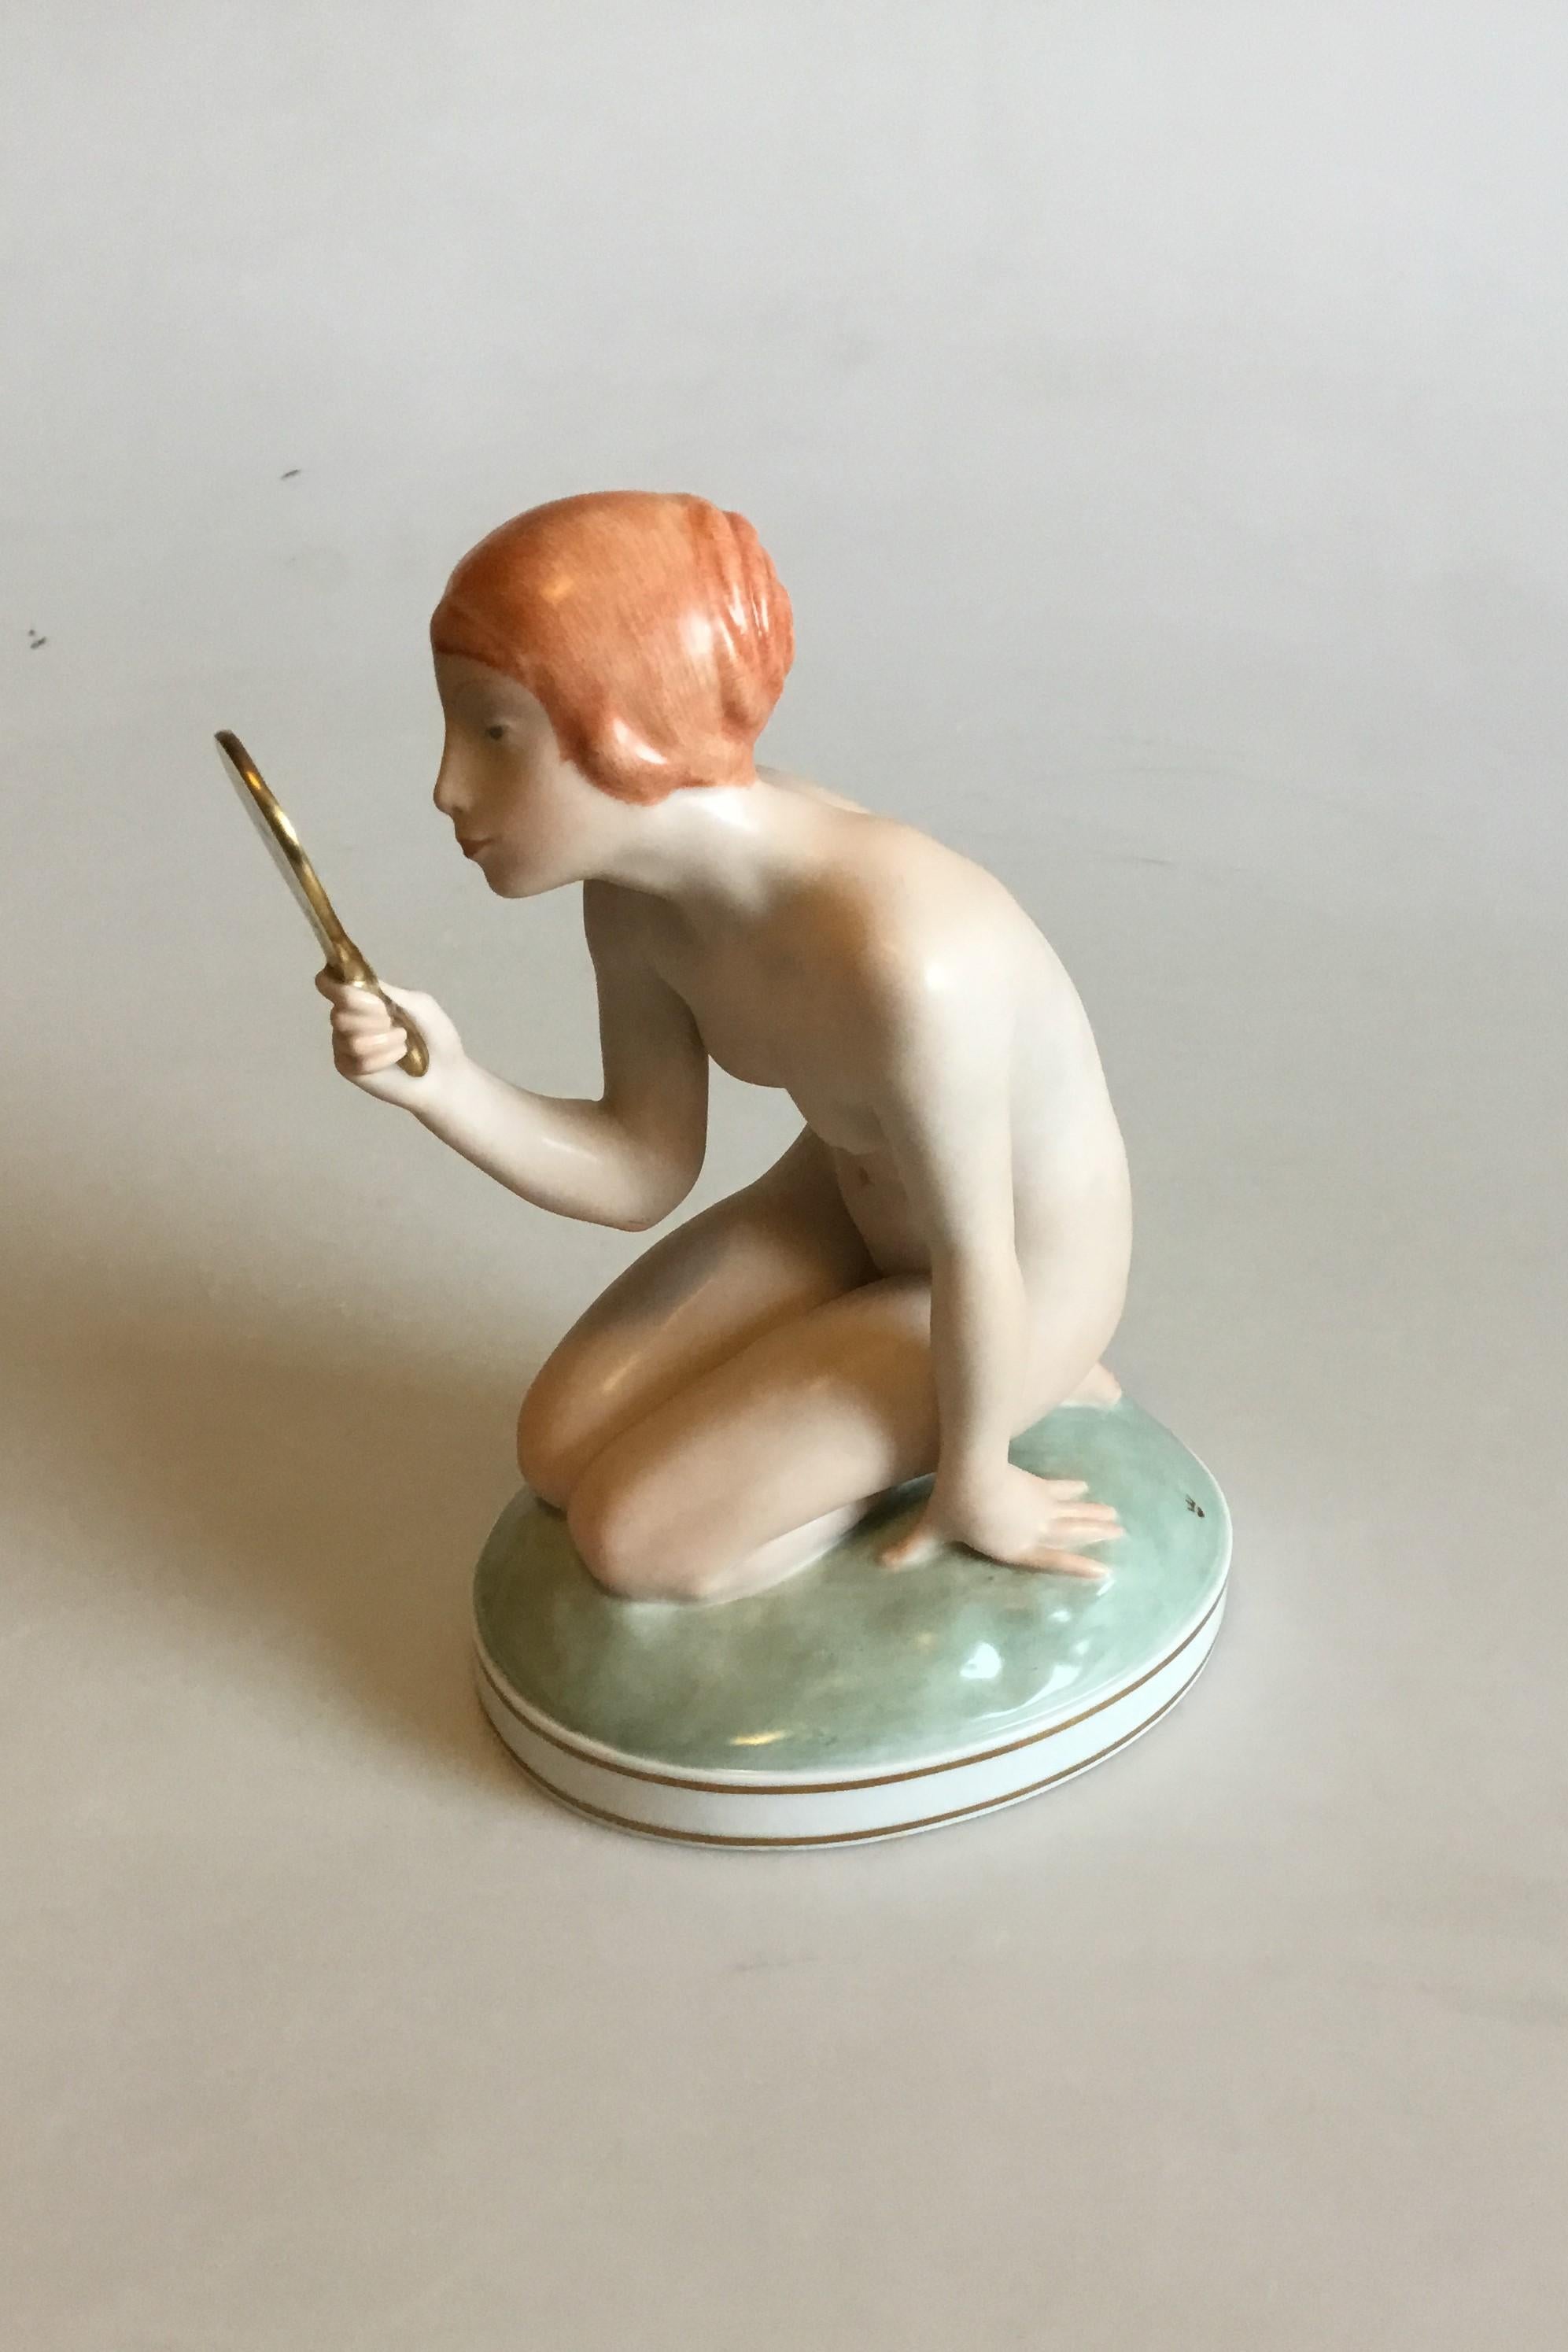 Royal Copenhagen Figurine of girl with mirror No 1244. Designed by Gerhard Henning. Dated 1920-4-24. 1st quality. Measures: 18 cm 7 3/32 in.
Perfect condition.